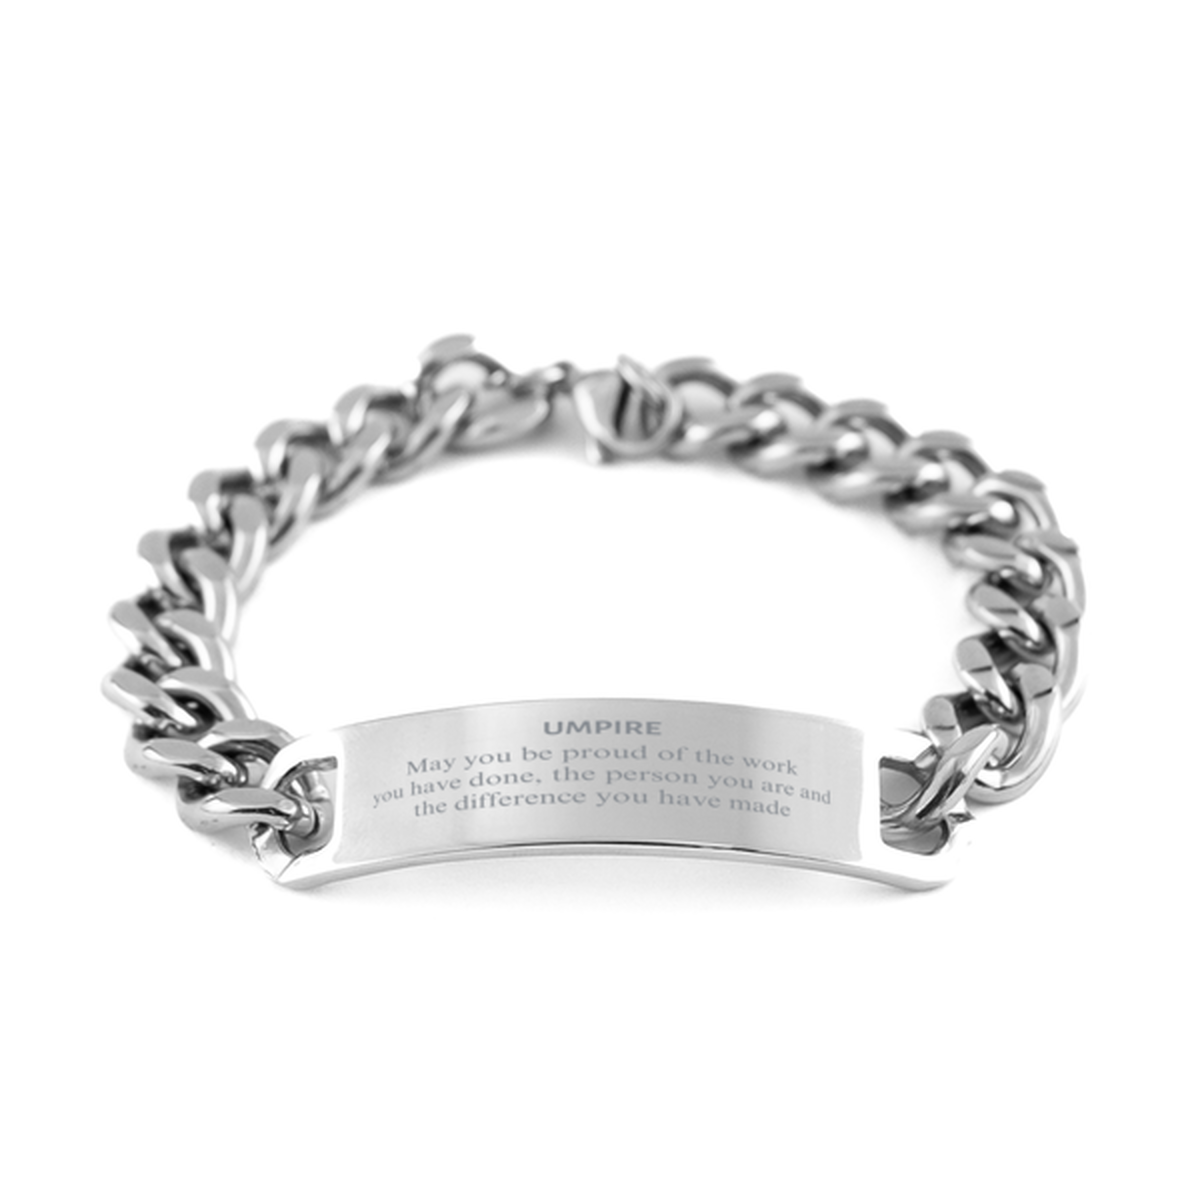 Umpire May you be proud of the work you have done, Retirement Umpire Cuban Chain Stainless Steel Bracelet for Colleague Appreciation Gifts Amazing for Umpire